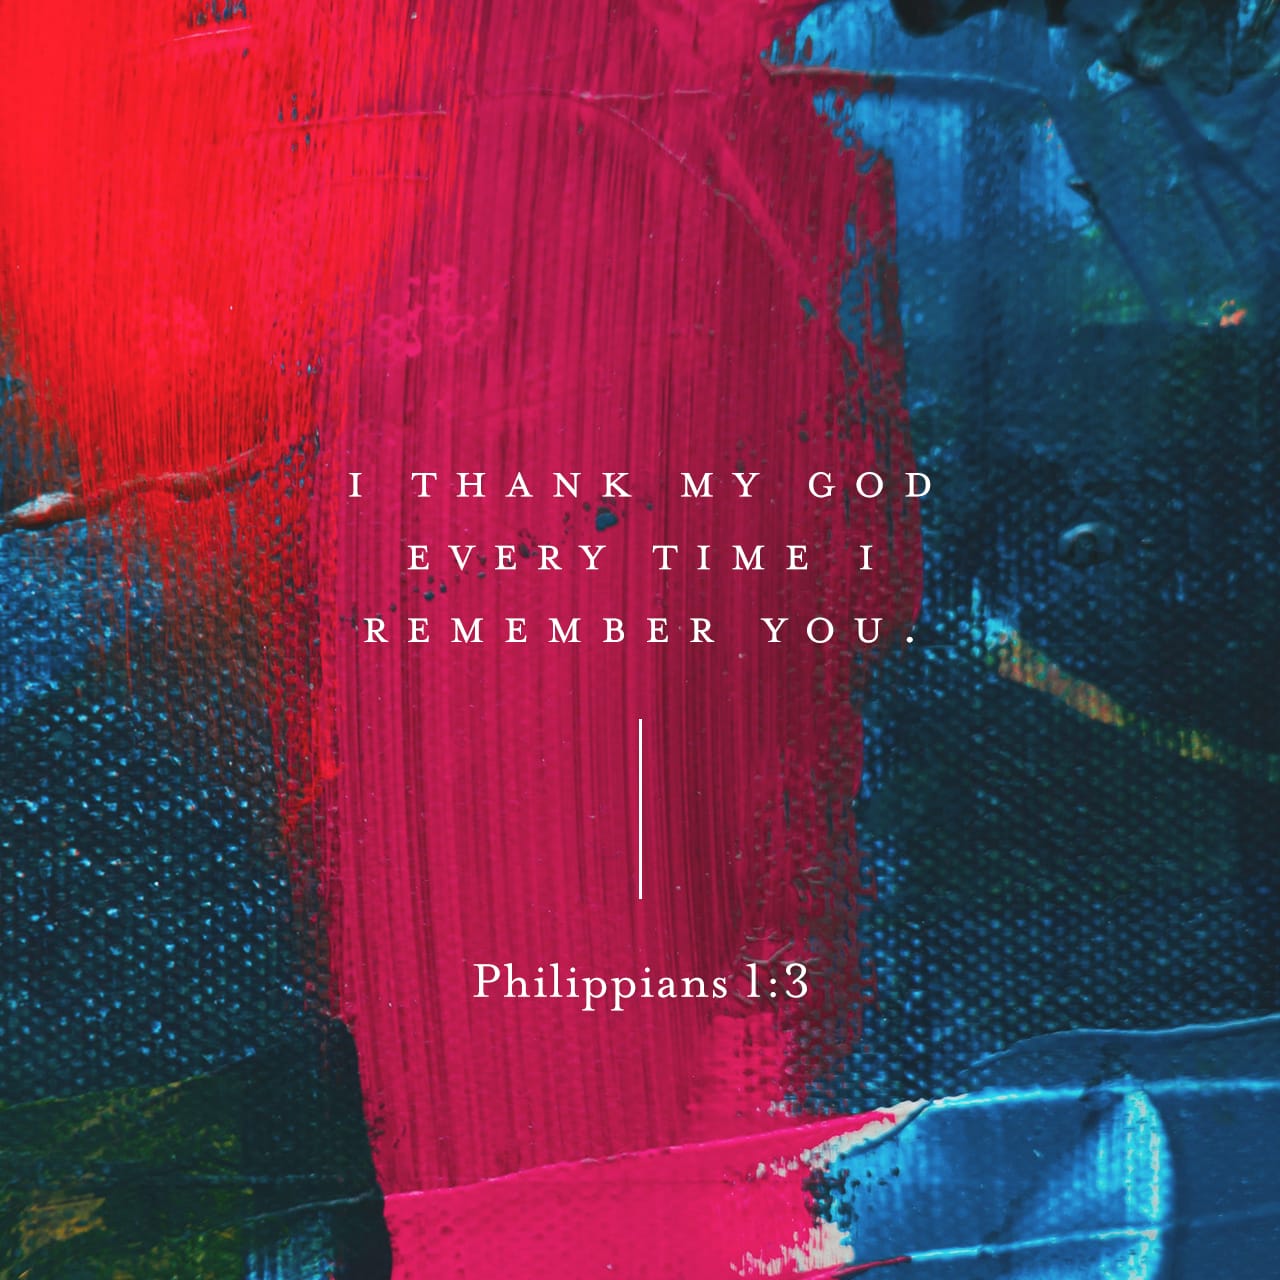 Philippians 1:3 NIV I thank my God every time I remember you.